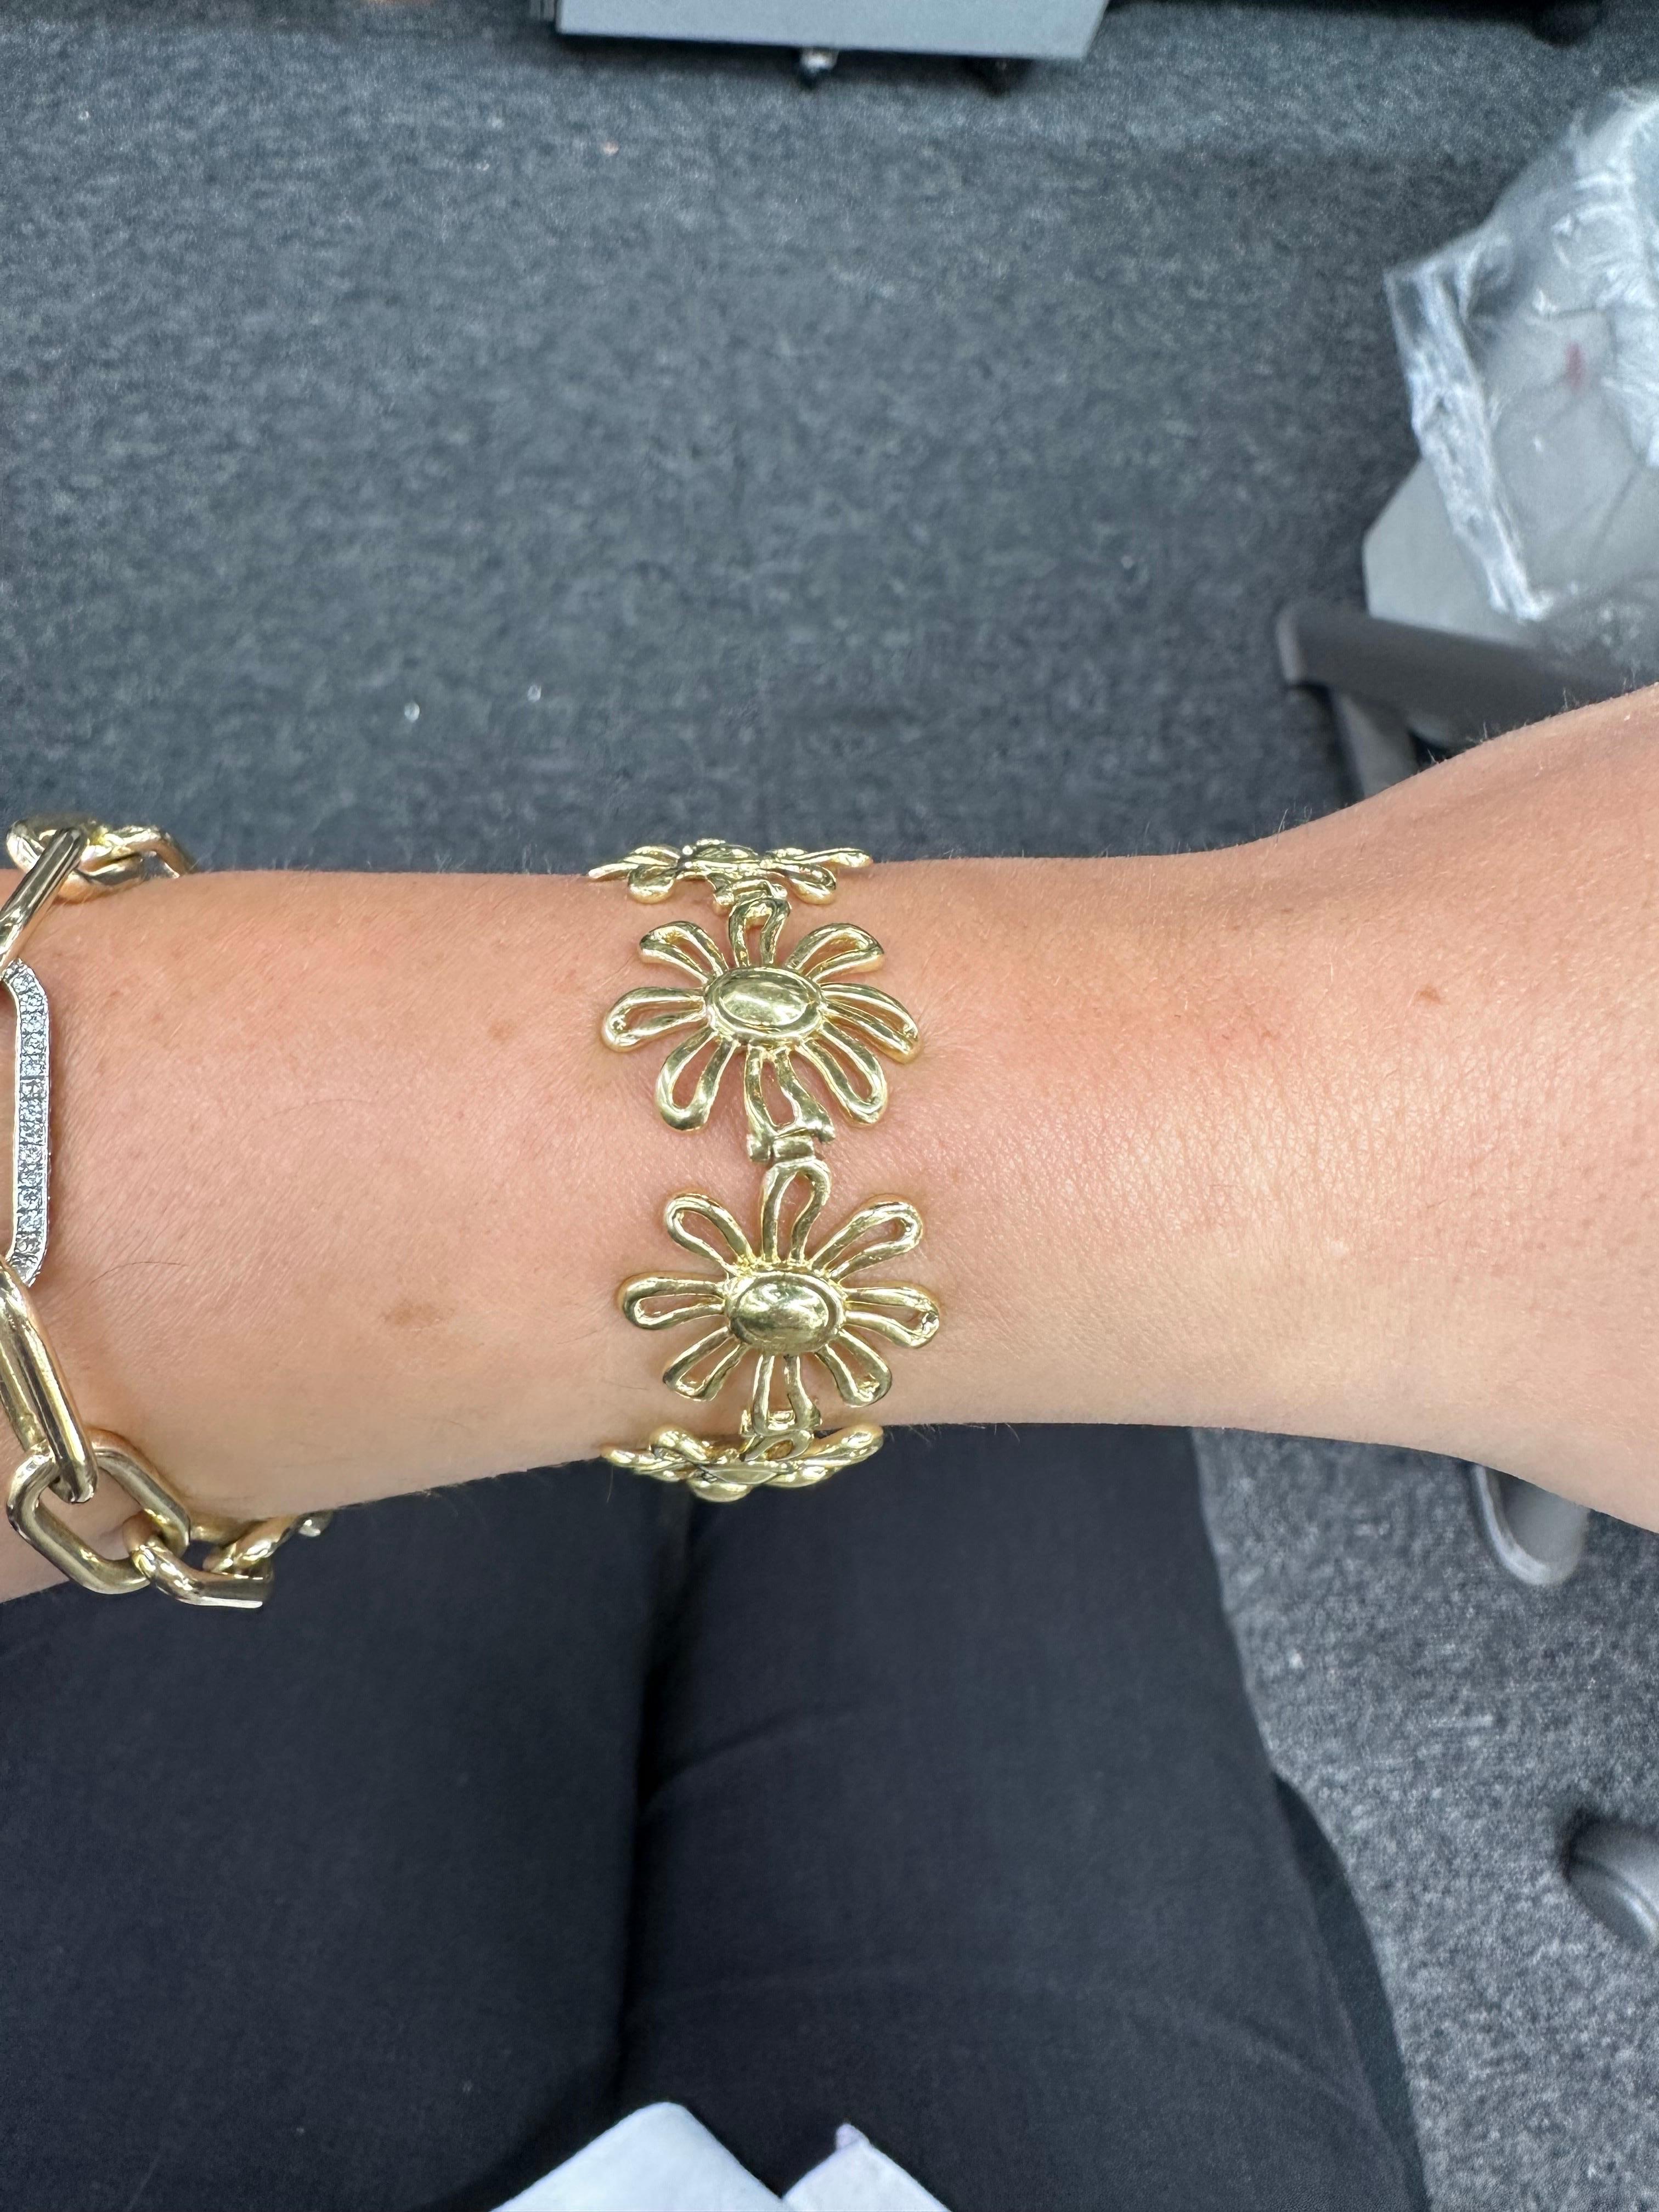 Tiffany & Co. Paloma Picasso Daisy Bracelet 34.6 Grams 18 Karat Yellow Gold In Excellent Condition For Sale In New York, NY